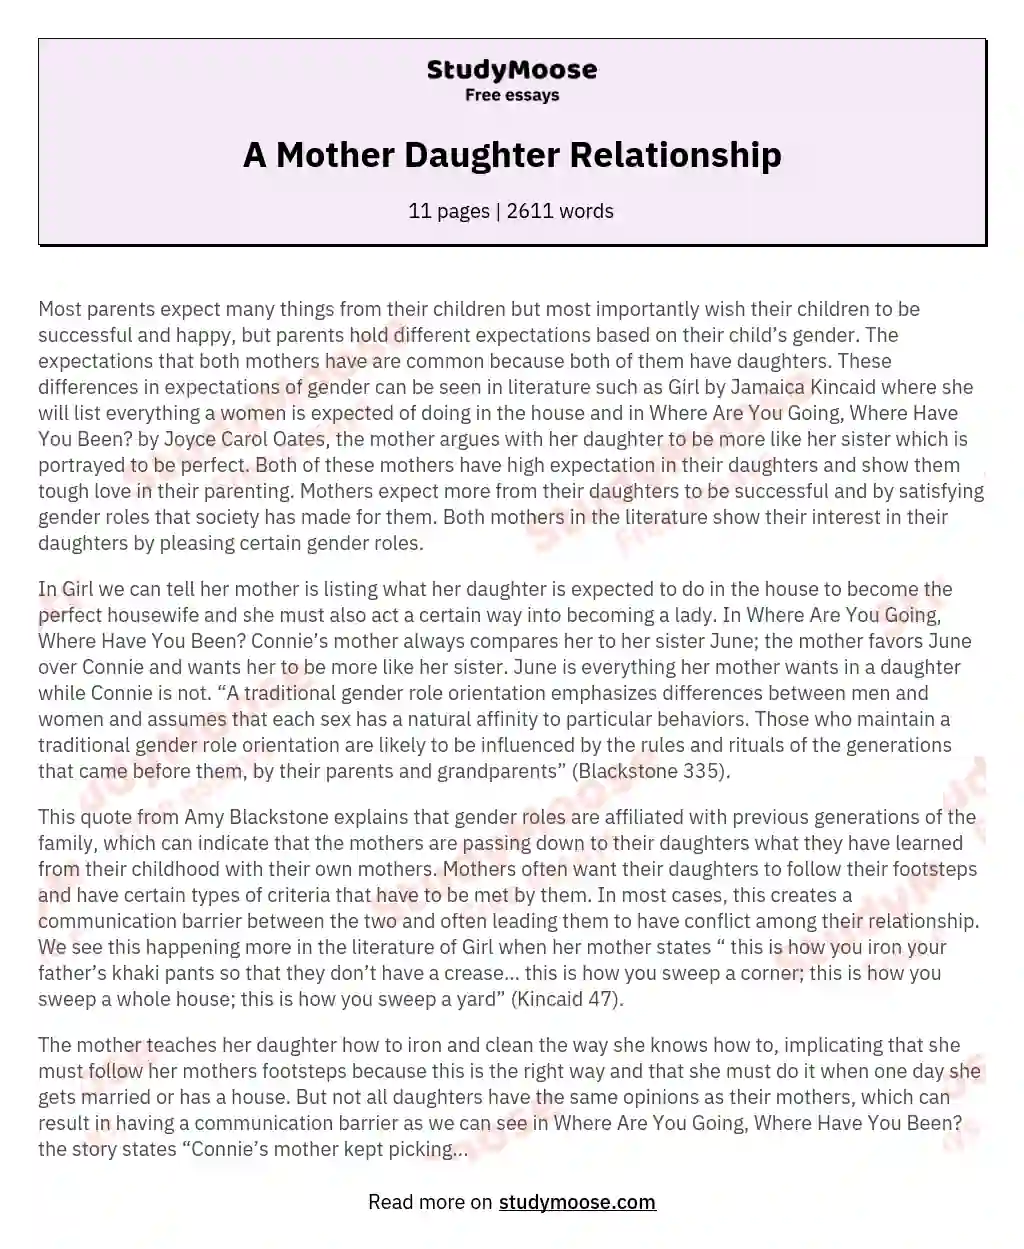 A Mother Daughter Relationship essay